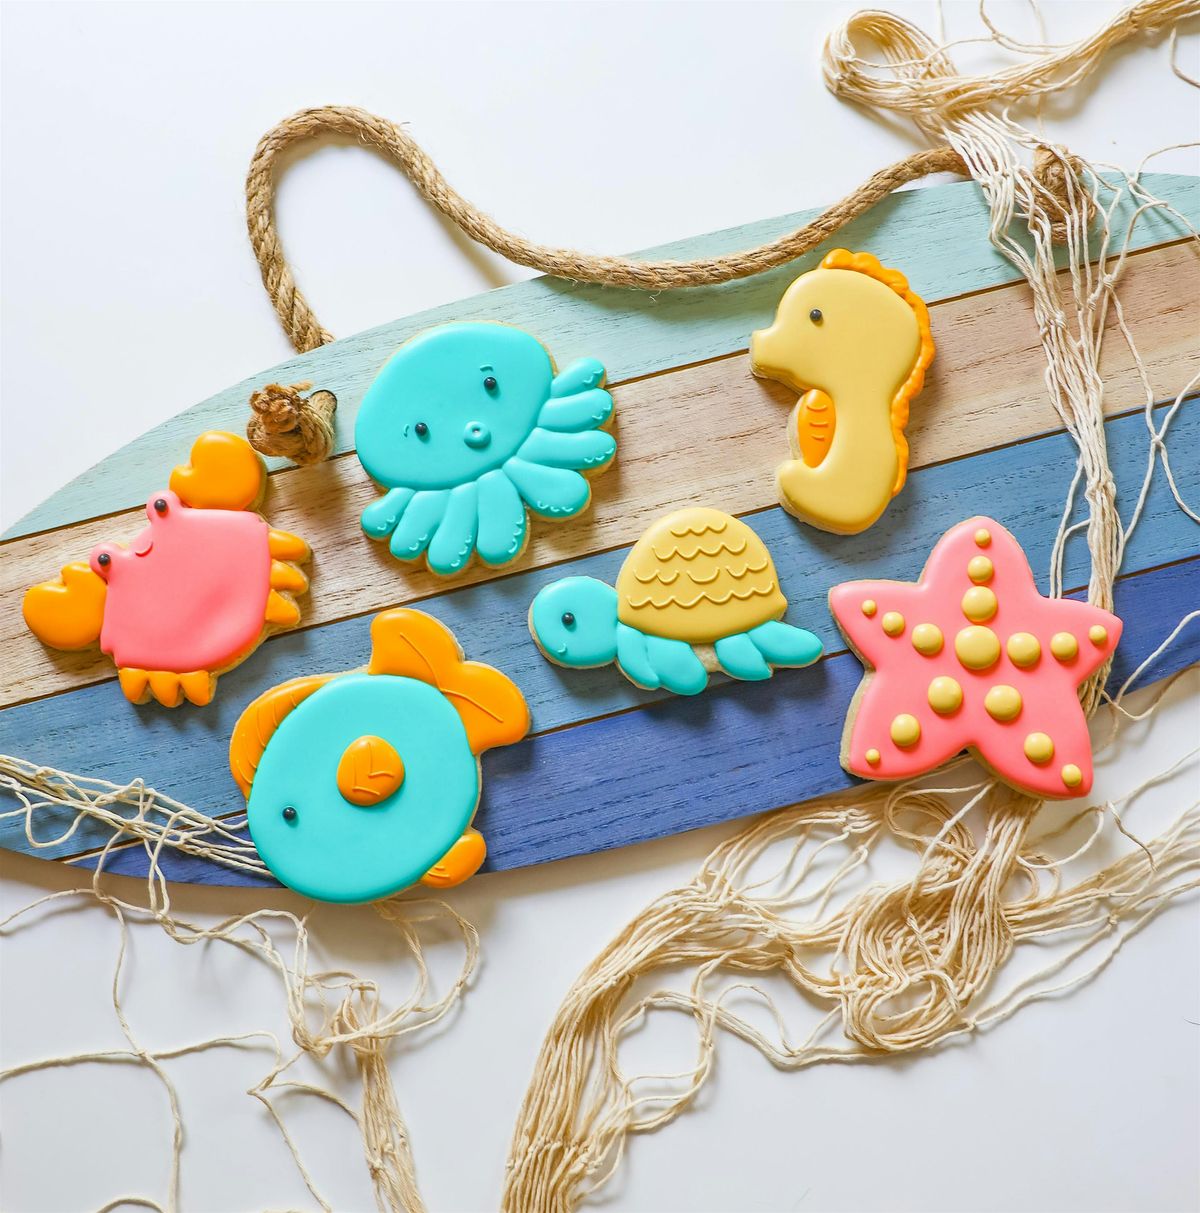 Confections by Charlee - Under the Sea cookie decorating class